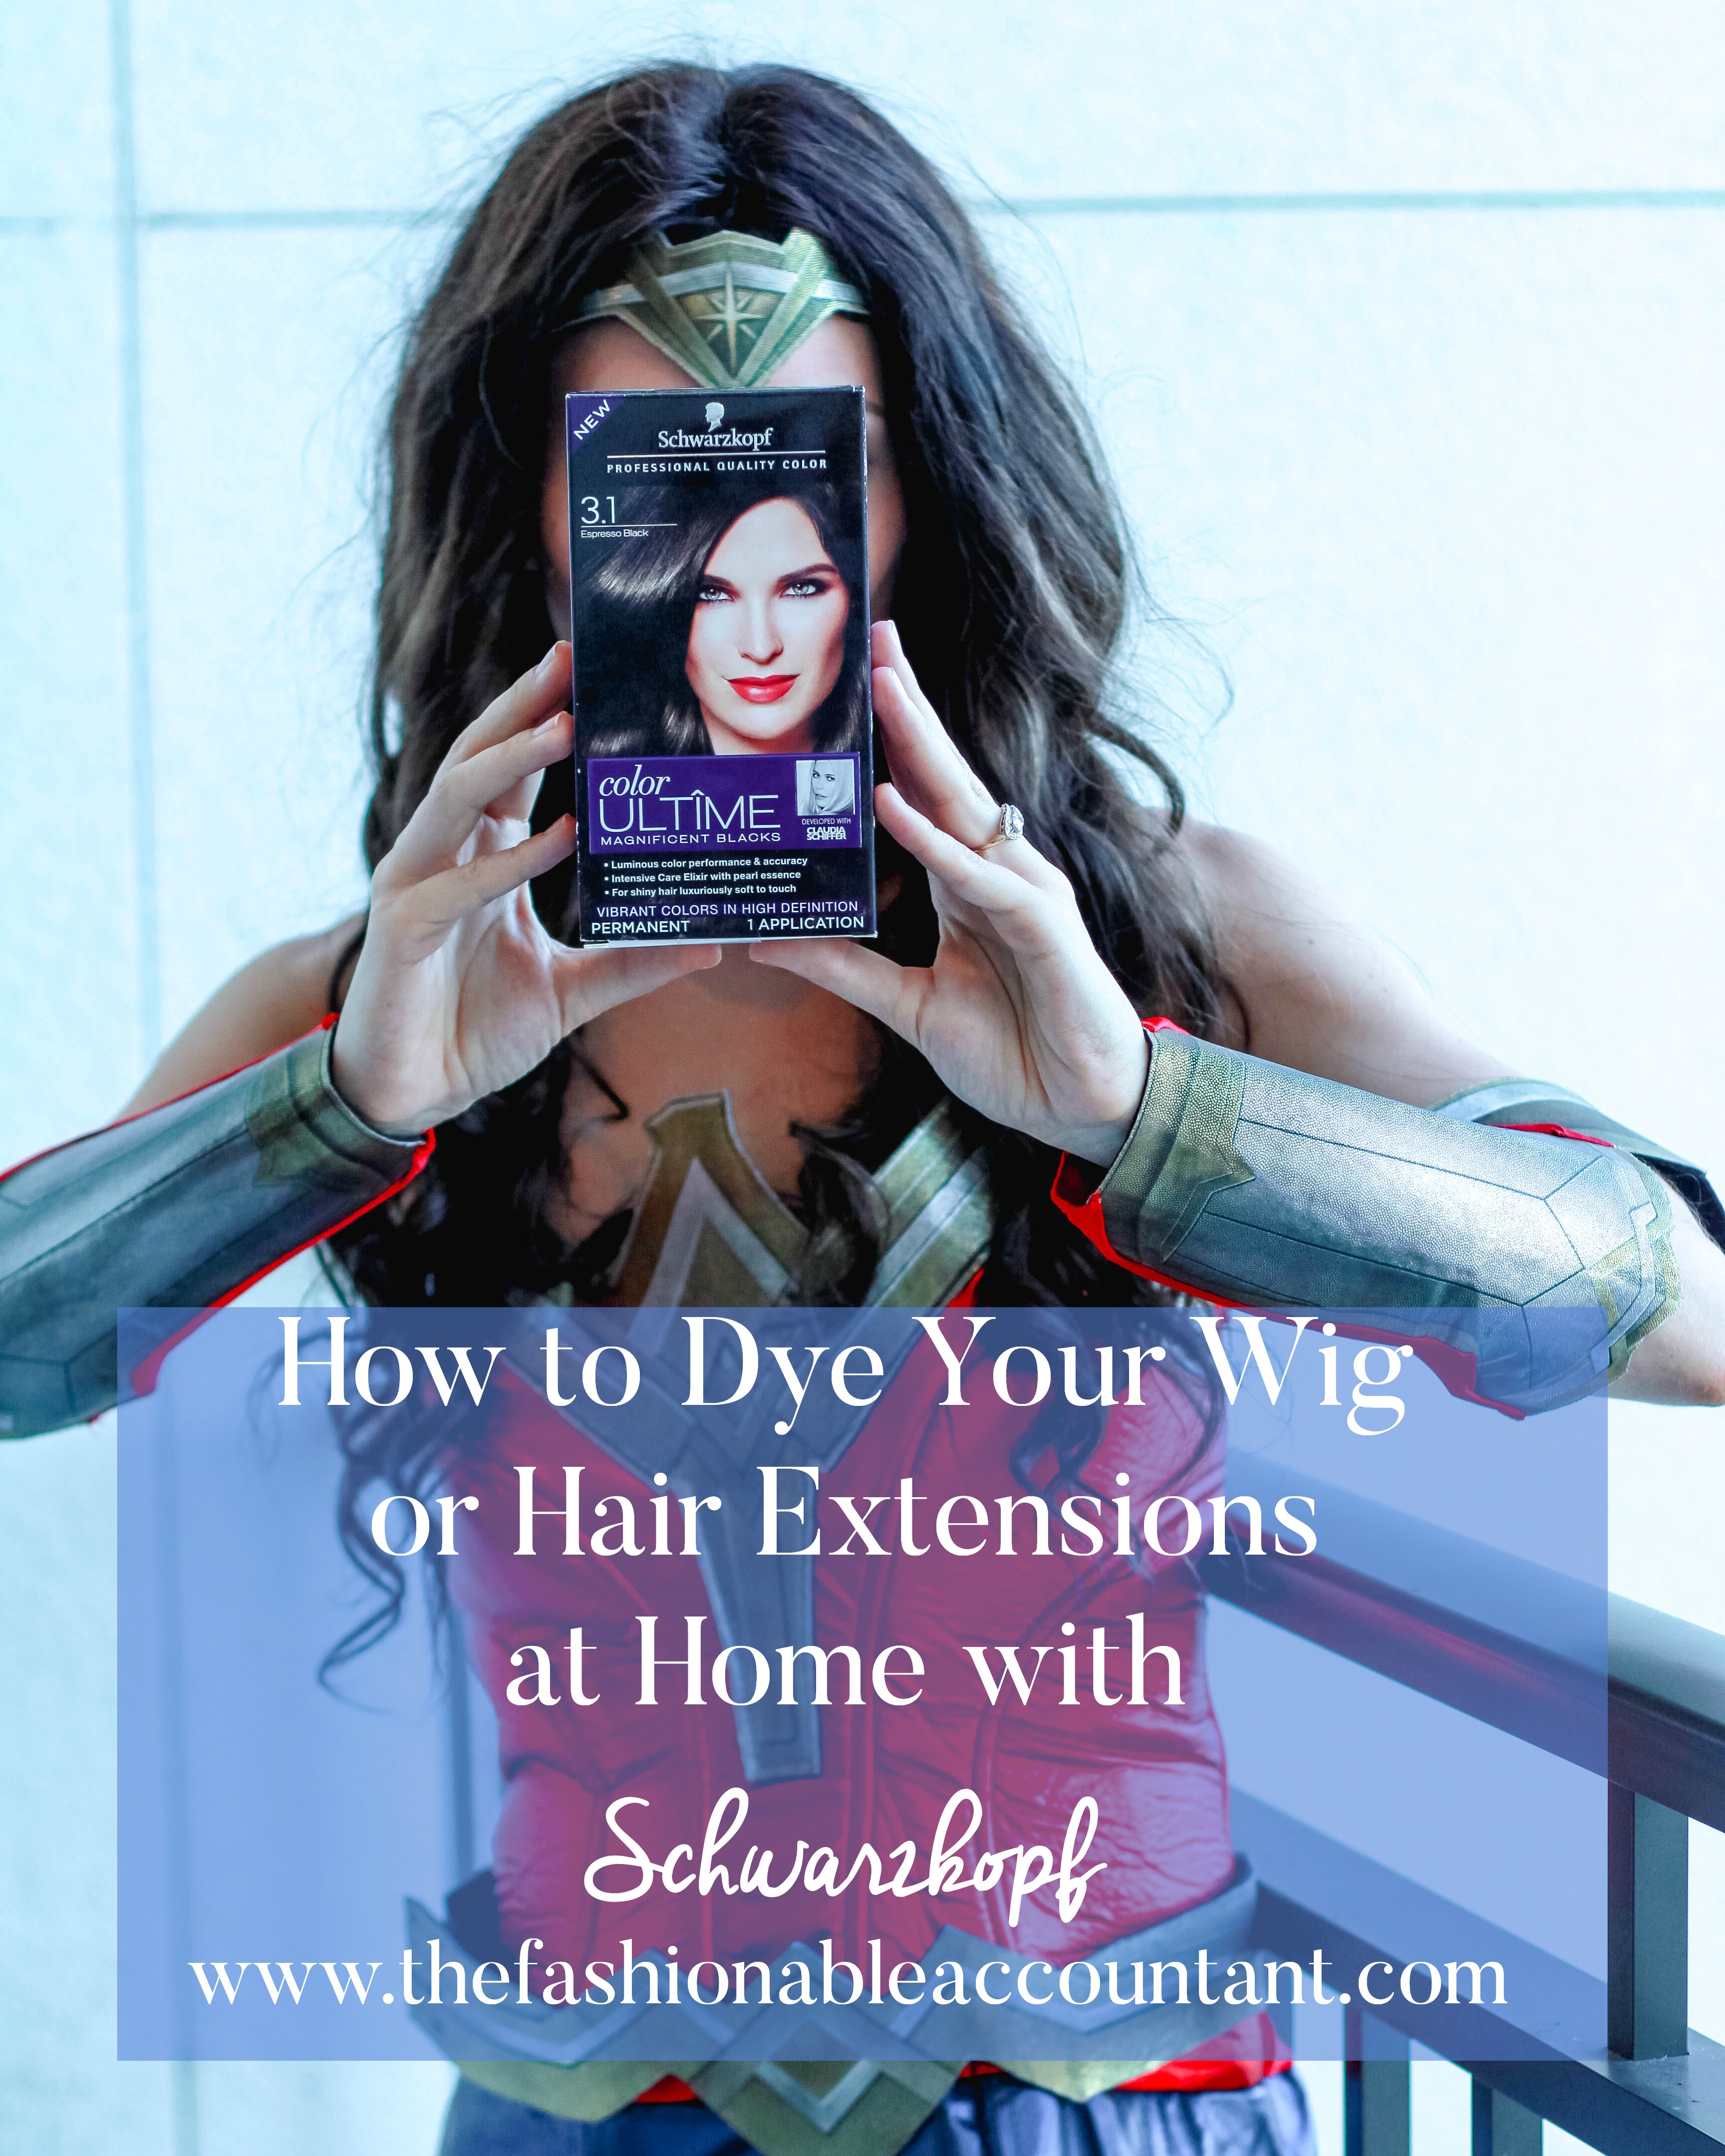 DYE YOUR WIG AND HAIR EXTENSIONS AT HOME